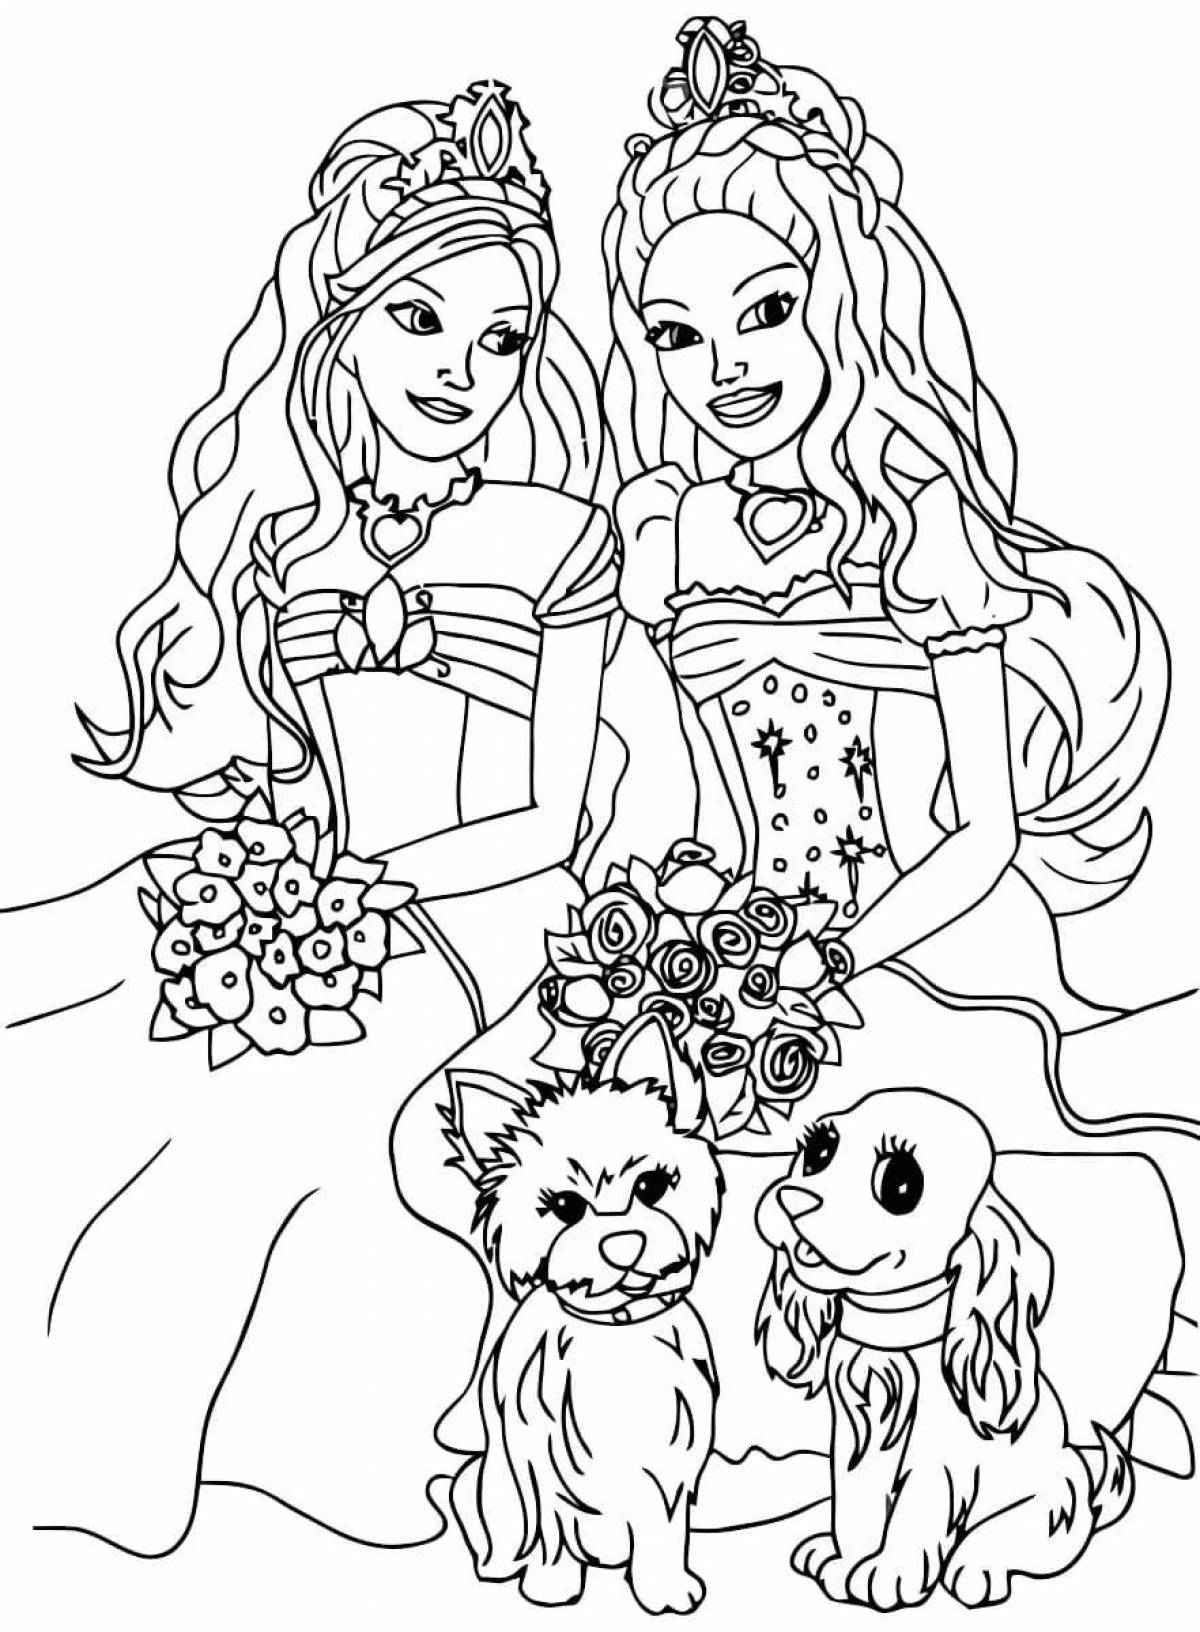 Fancy coloring pages for girls